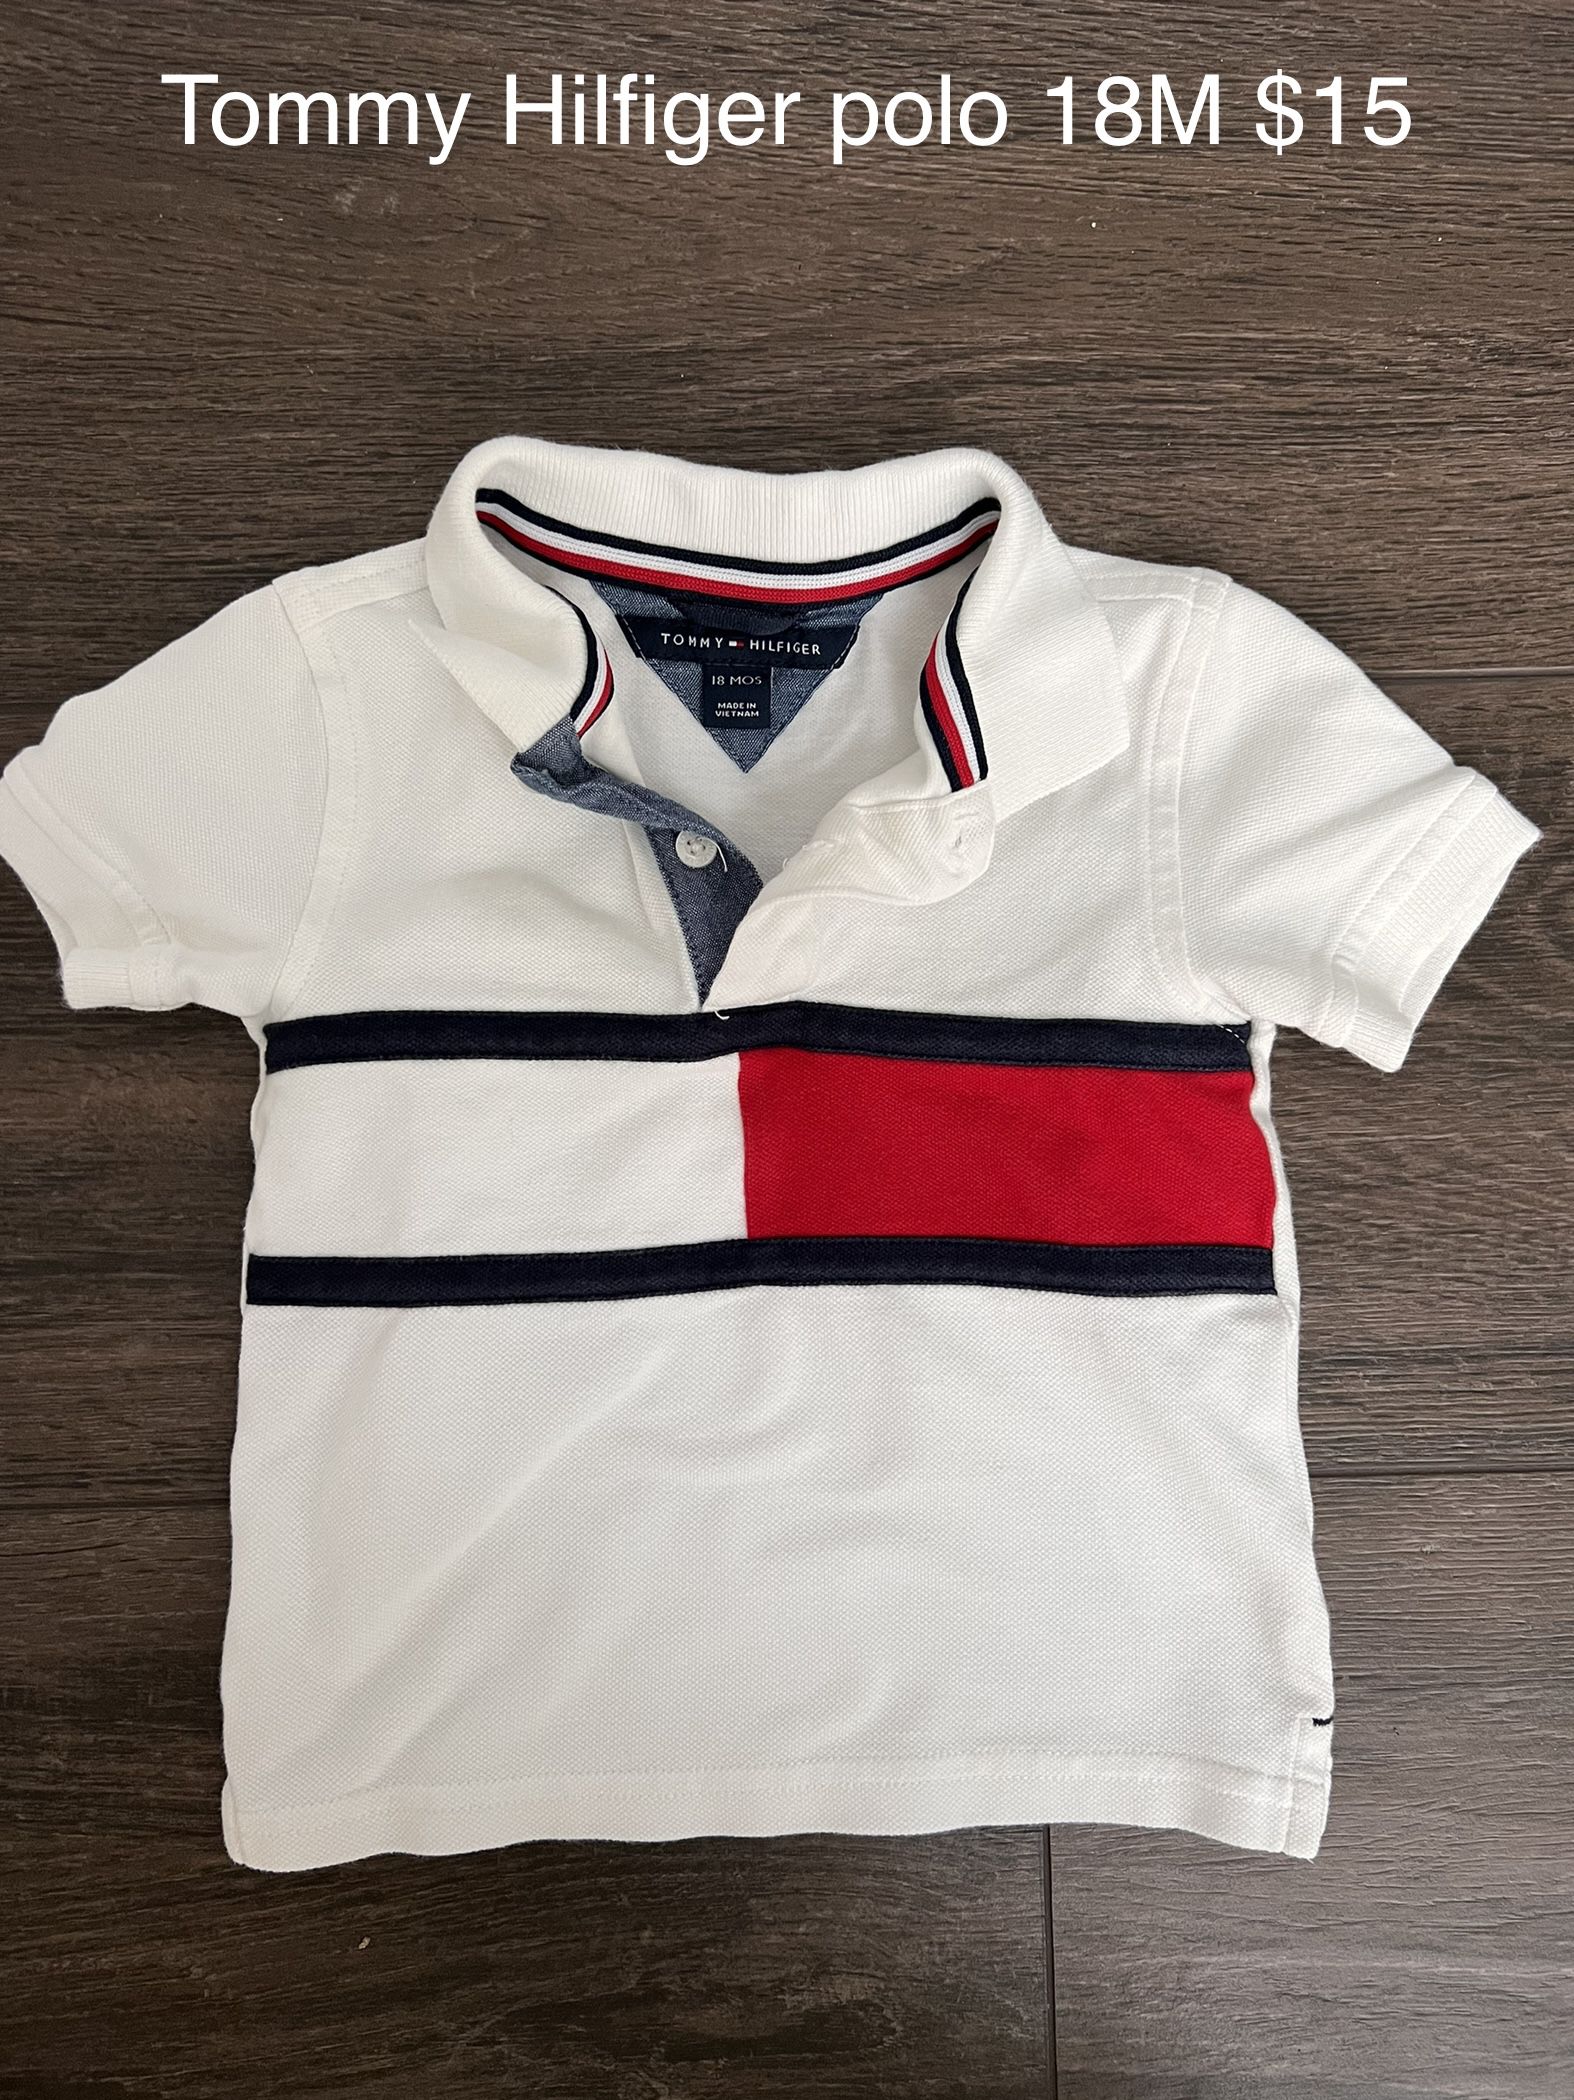 Baby Boy Girl Clothes, Tommy Hilfiger 18M for Sale in Delray Beach, FL - OfferUp